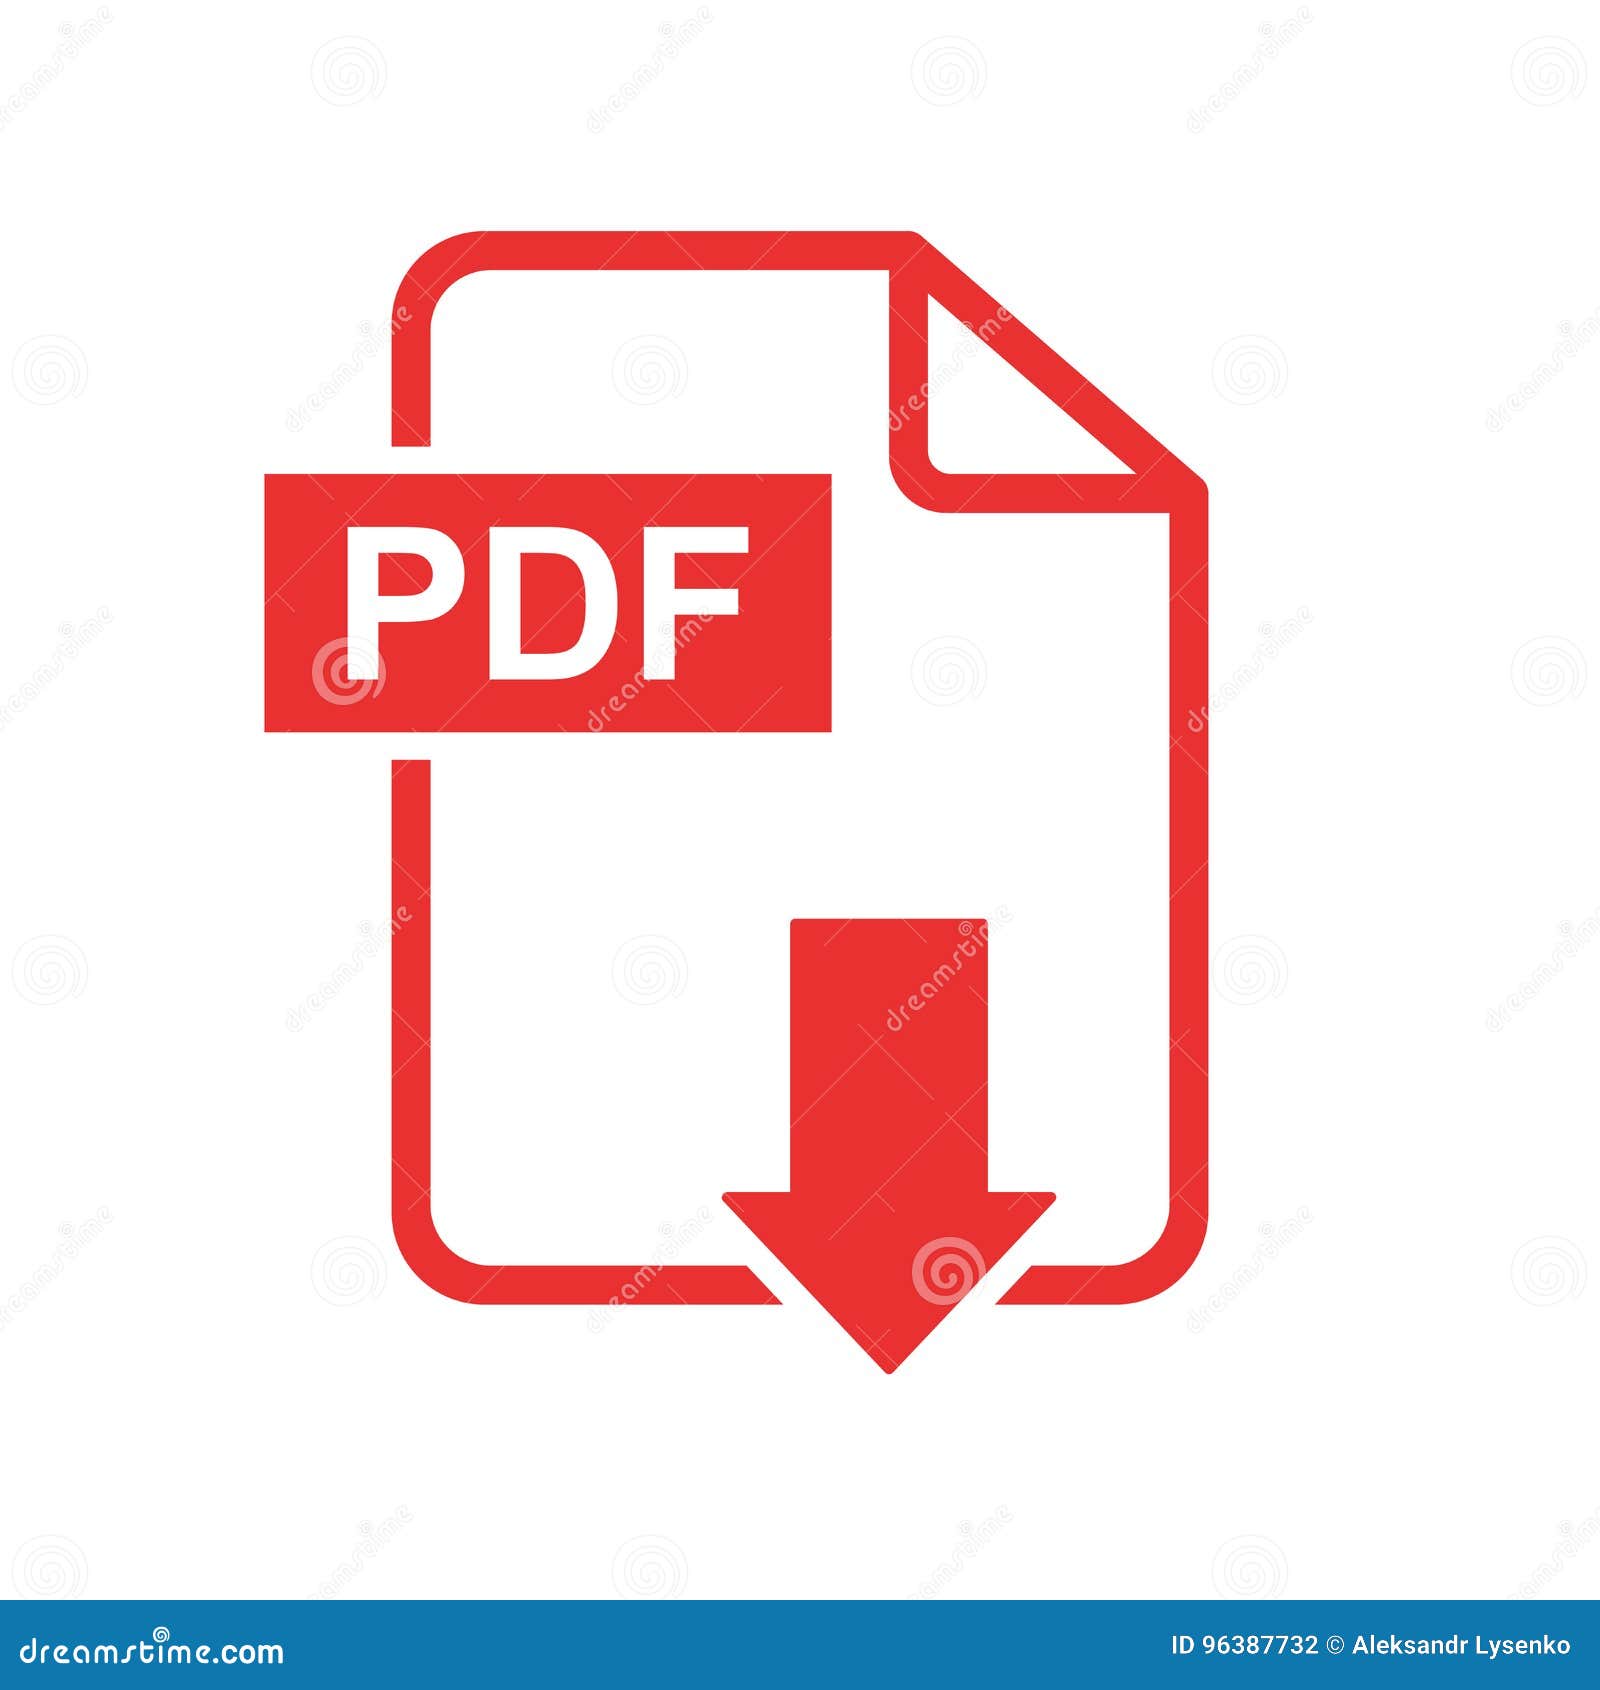 pdf download  icon. simple flat pictogram for business, ma